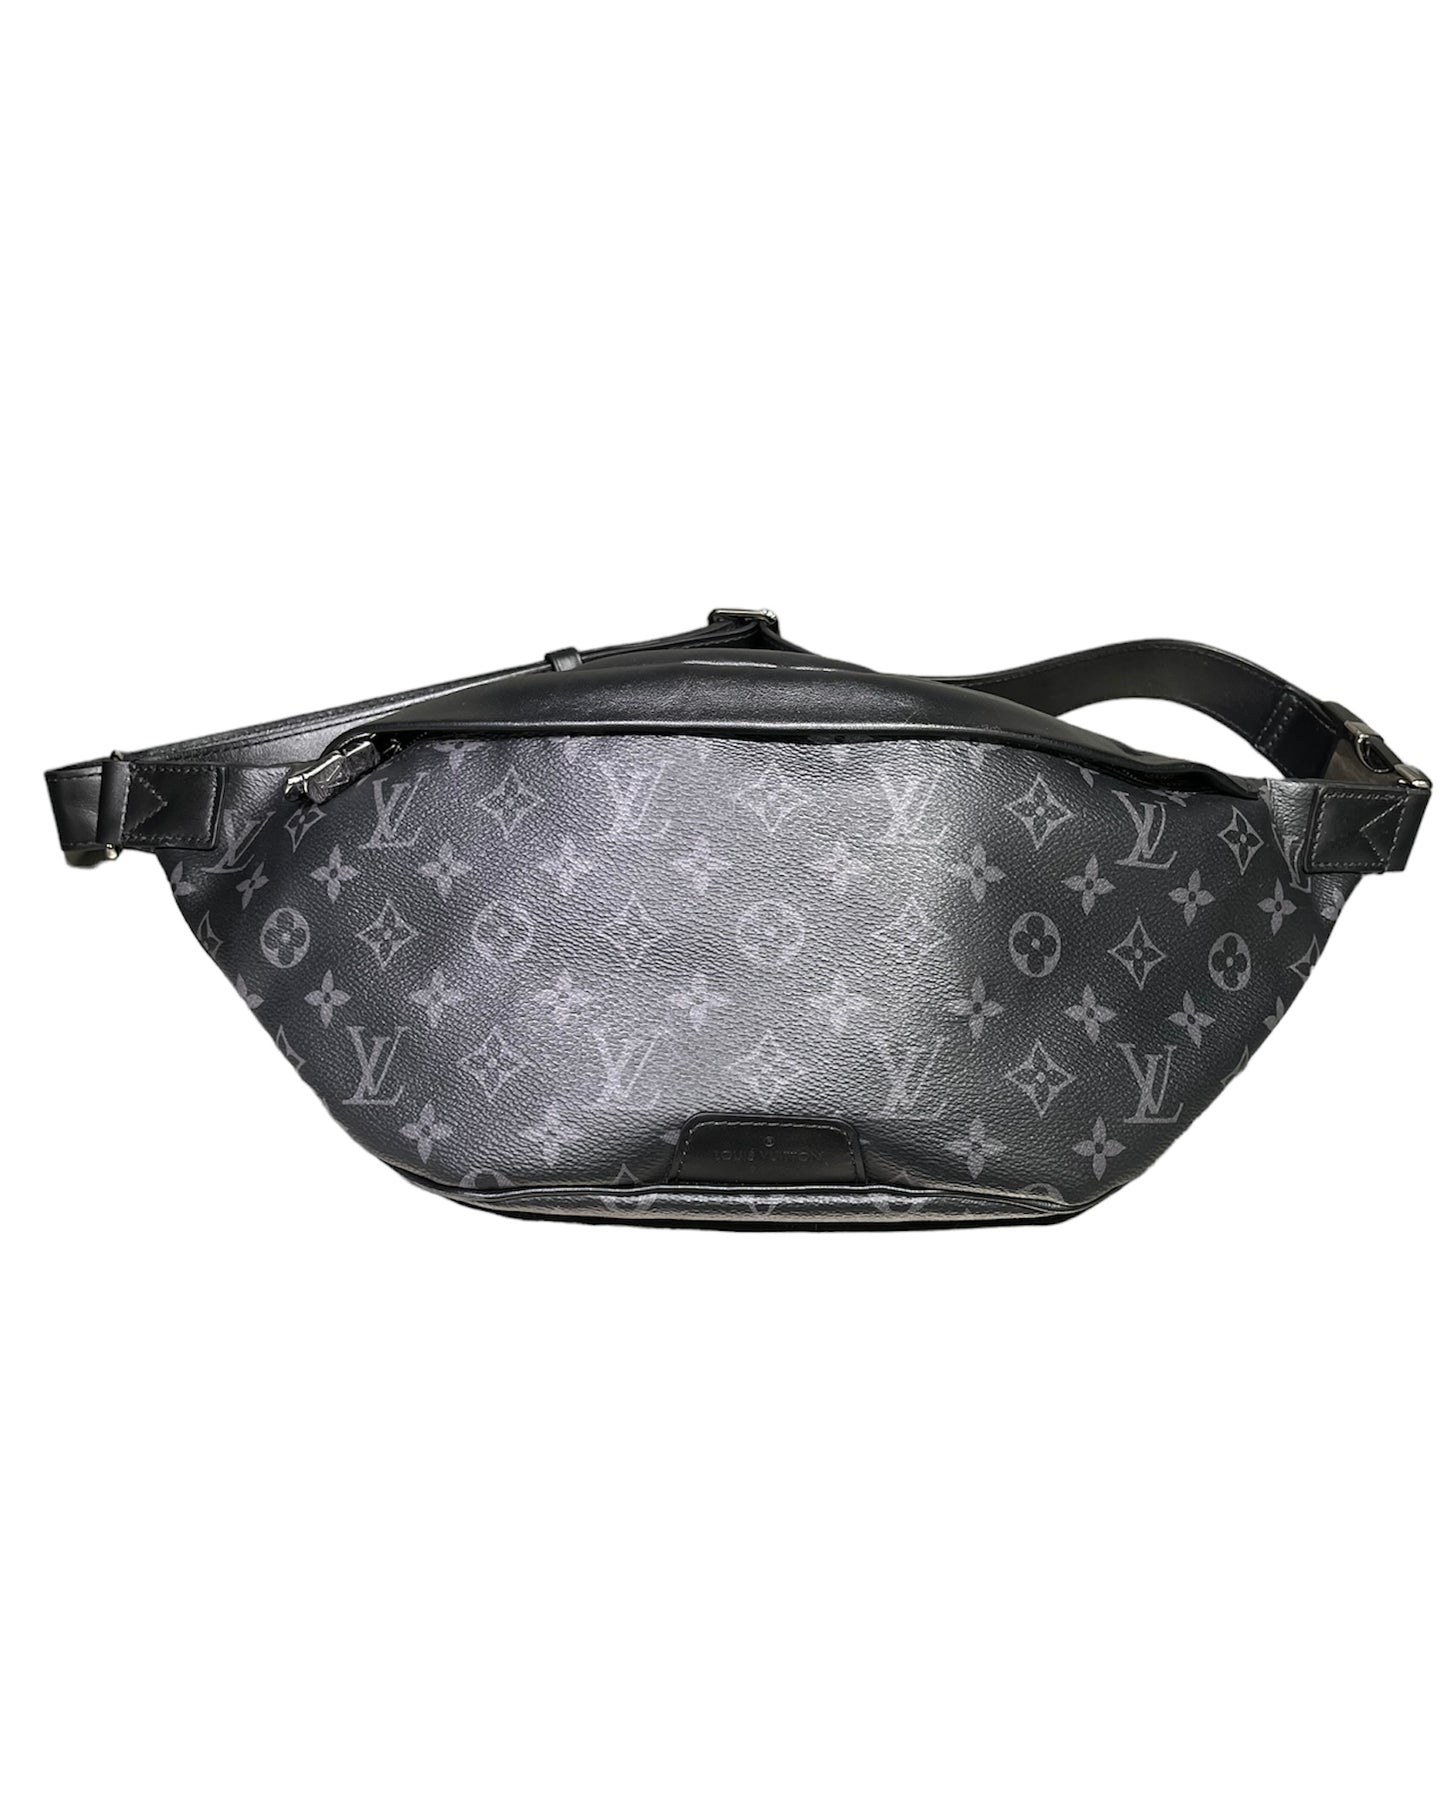 LOUIS VUITTON/Fanny Pack/OS/Monogram/Leather/BLK/Discovery Bumbag